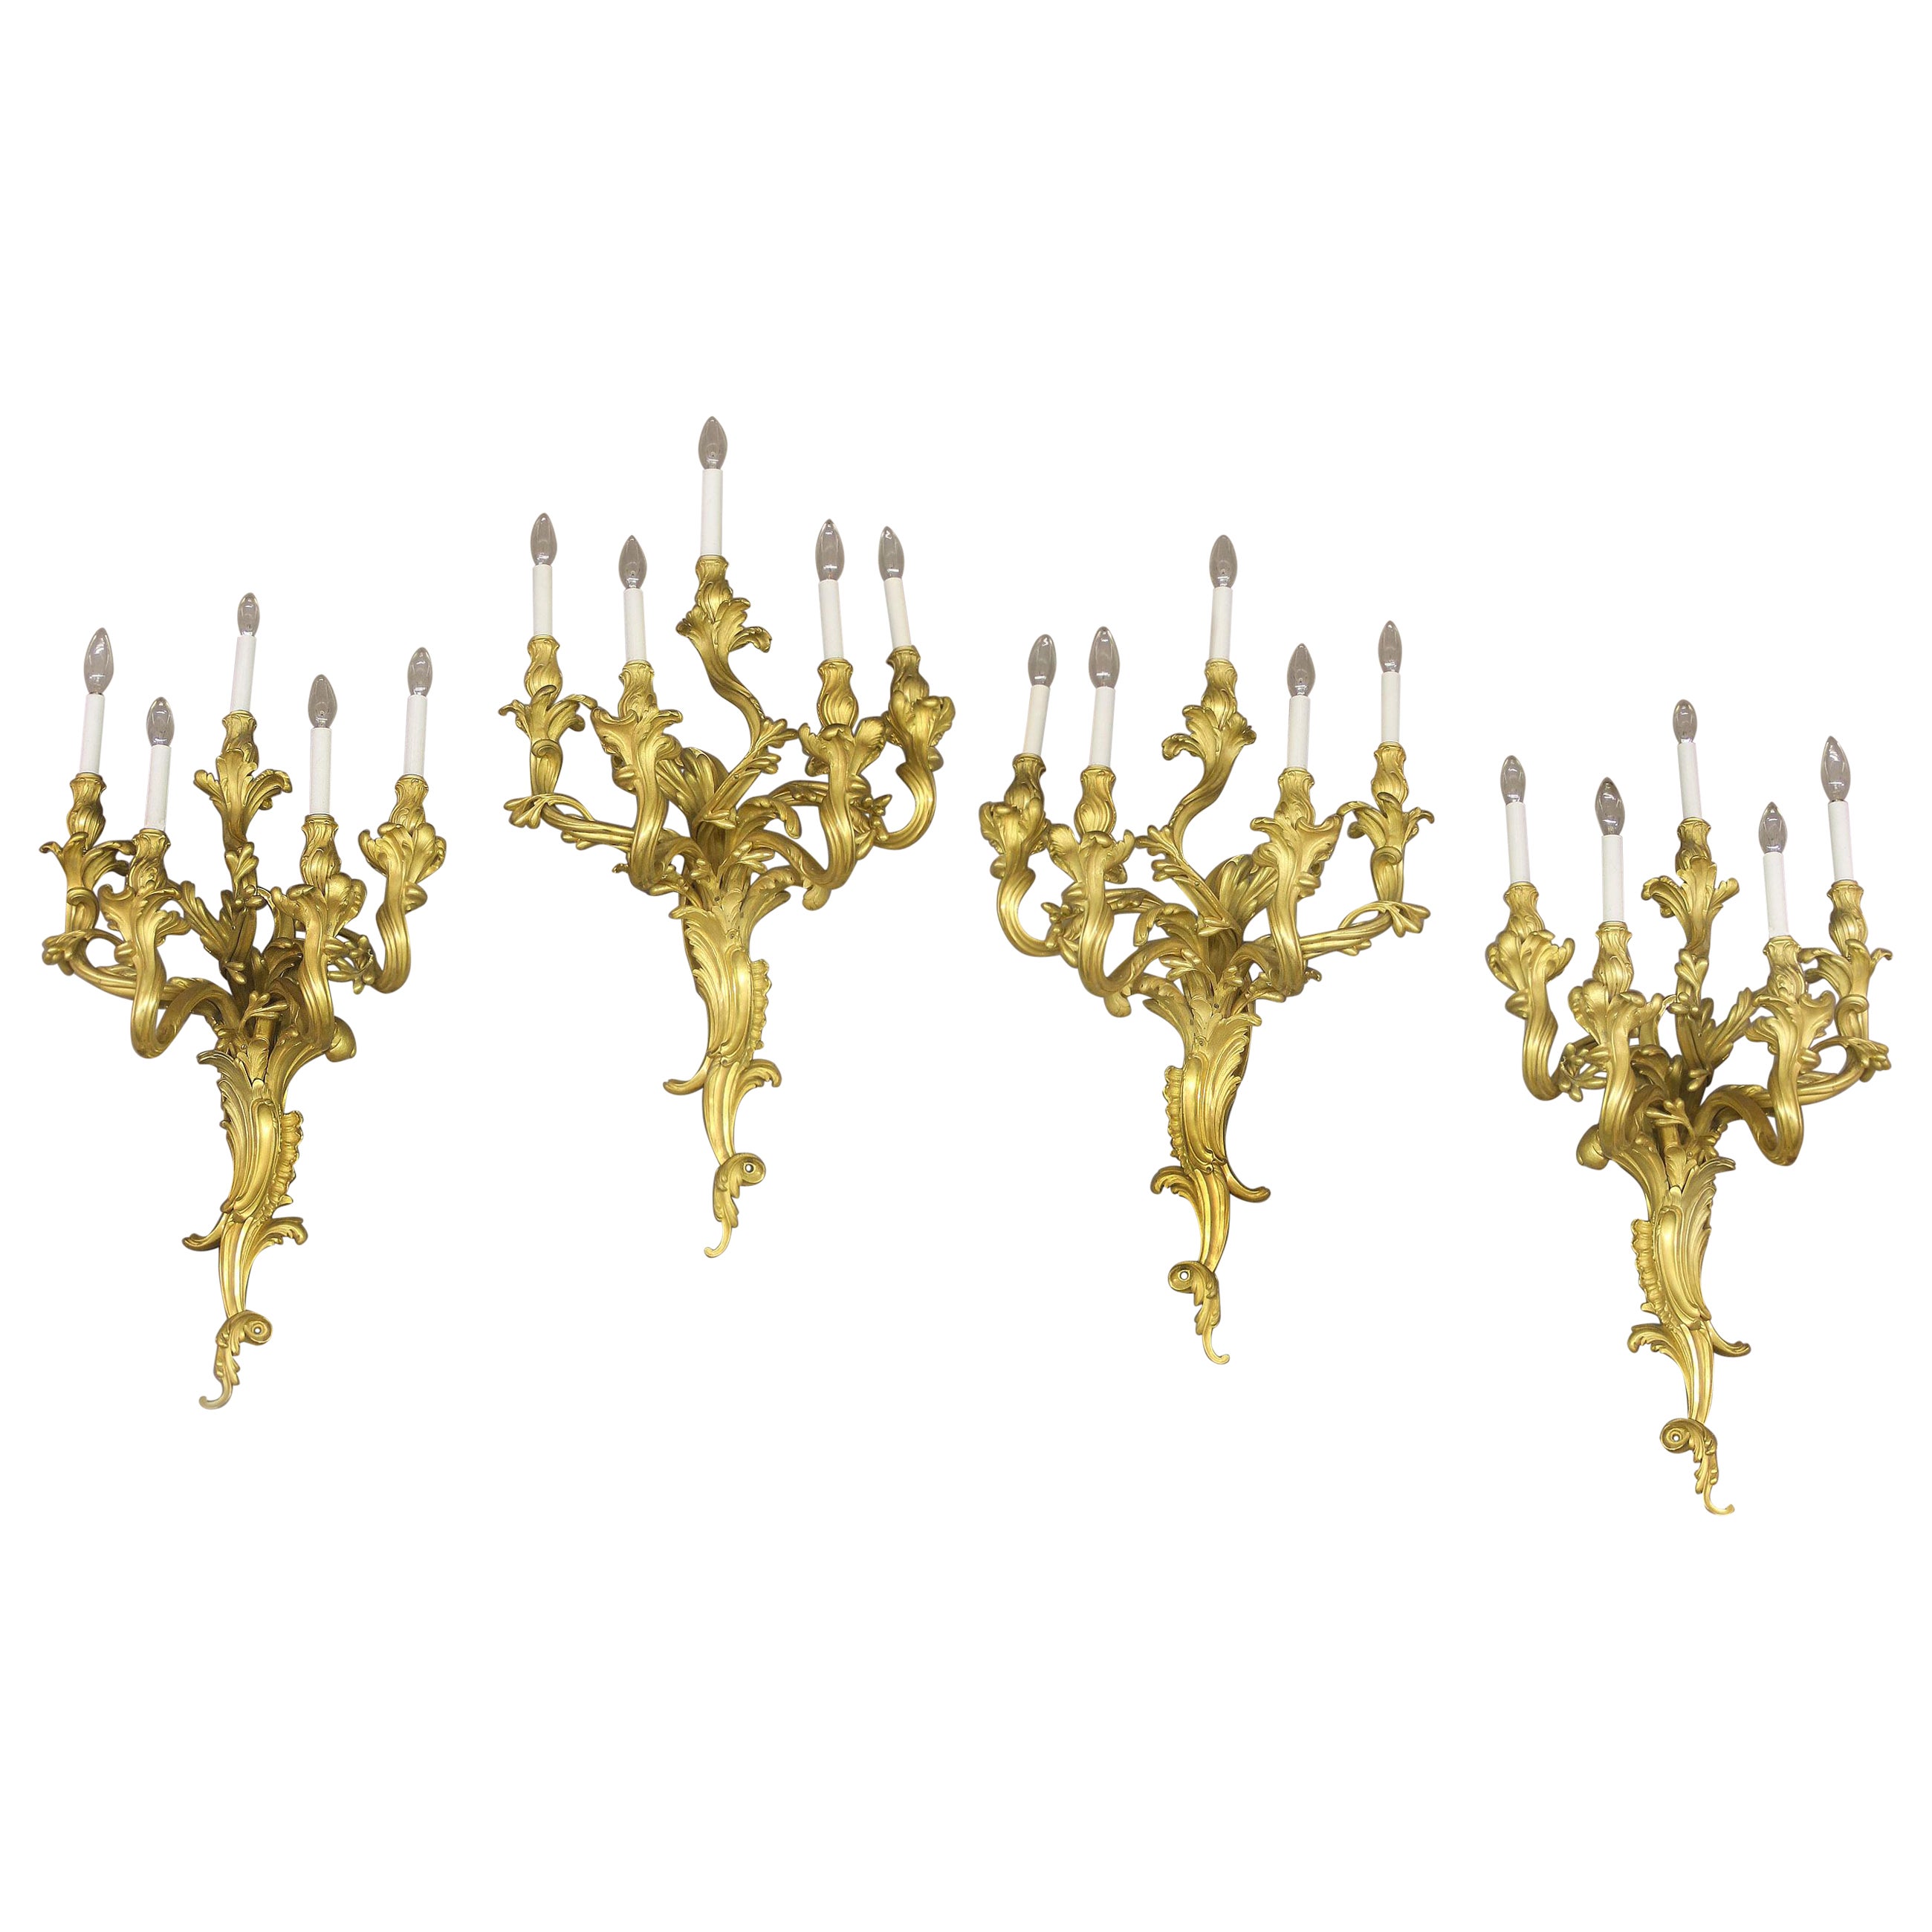 Fine Set of Four Early 20th Century Gilt Bronze Five Light Sconces by Caldwell